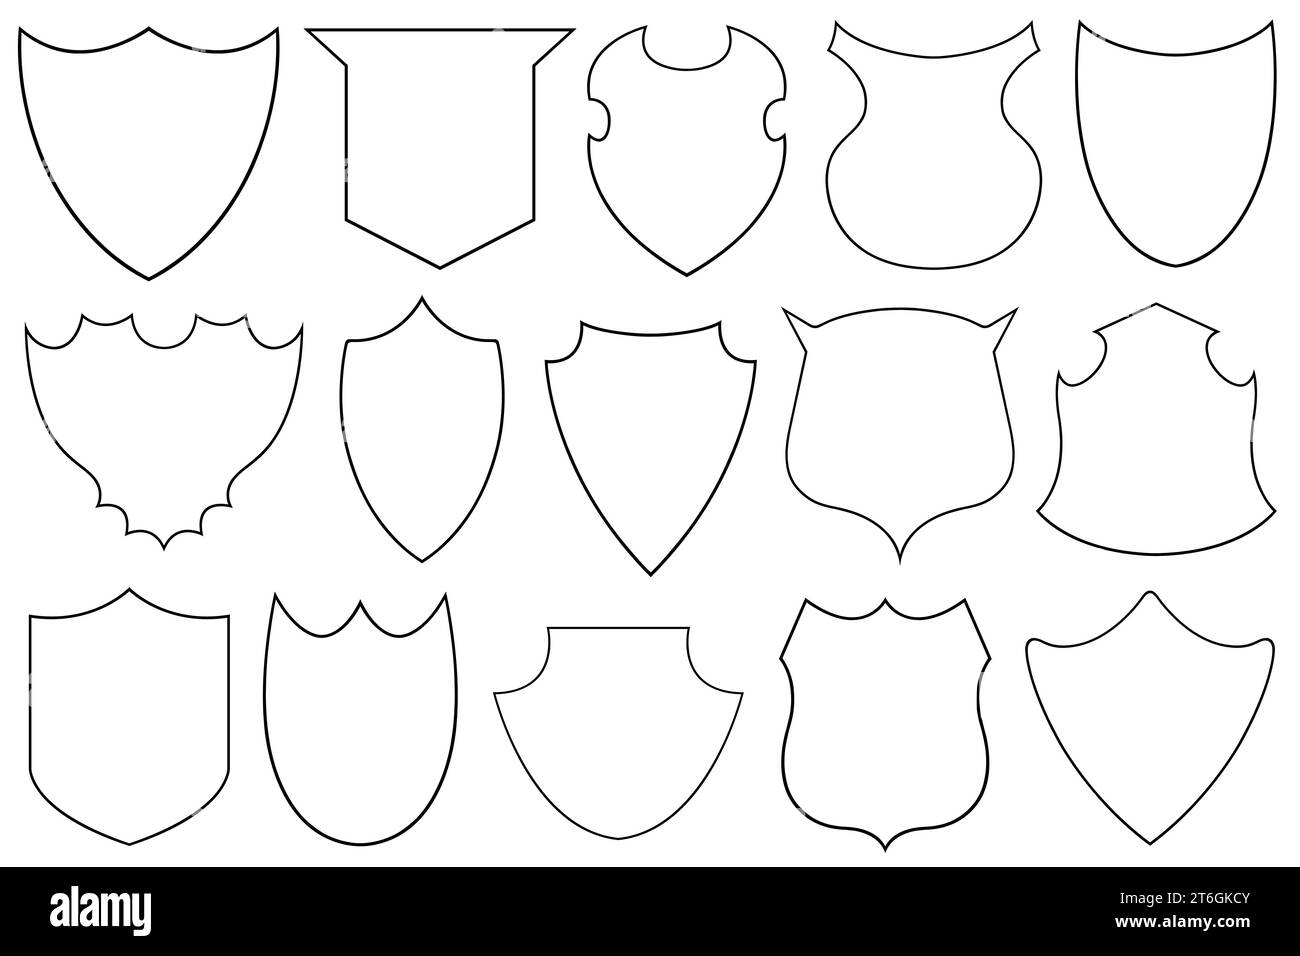 Collection of different shields illustration isolated on white Stock Photo